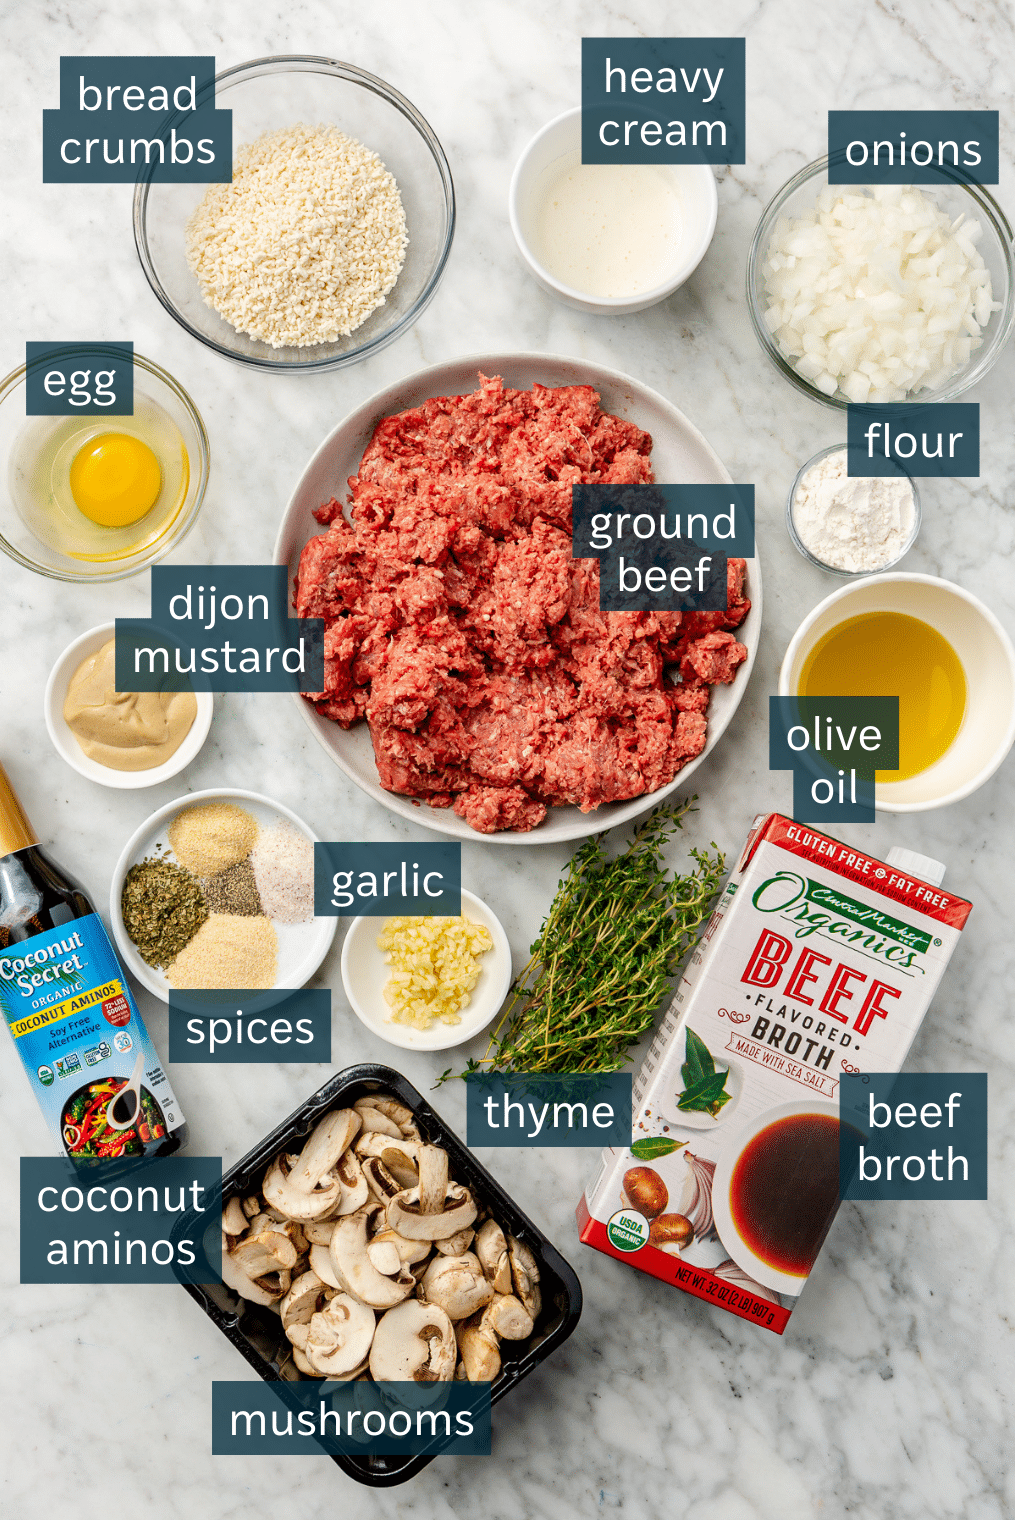 All of the ingredients needed for salisbury steak measured out on a marble surface.